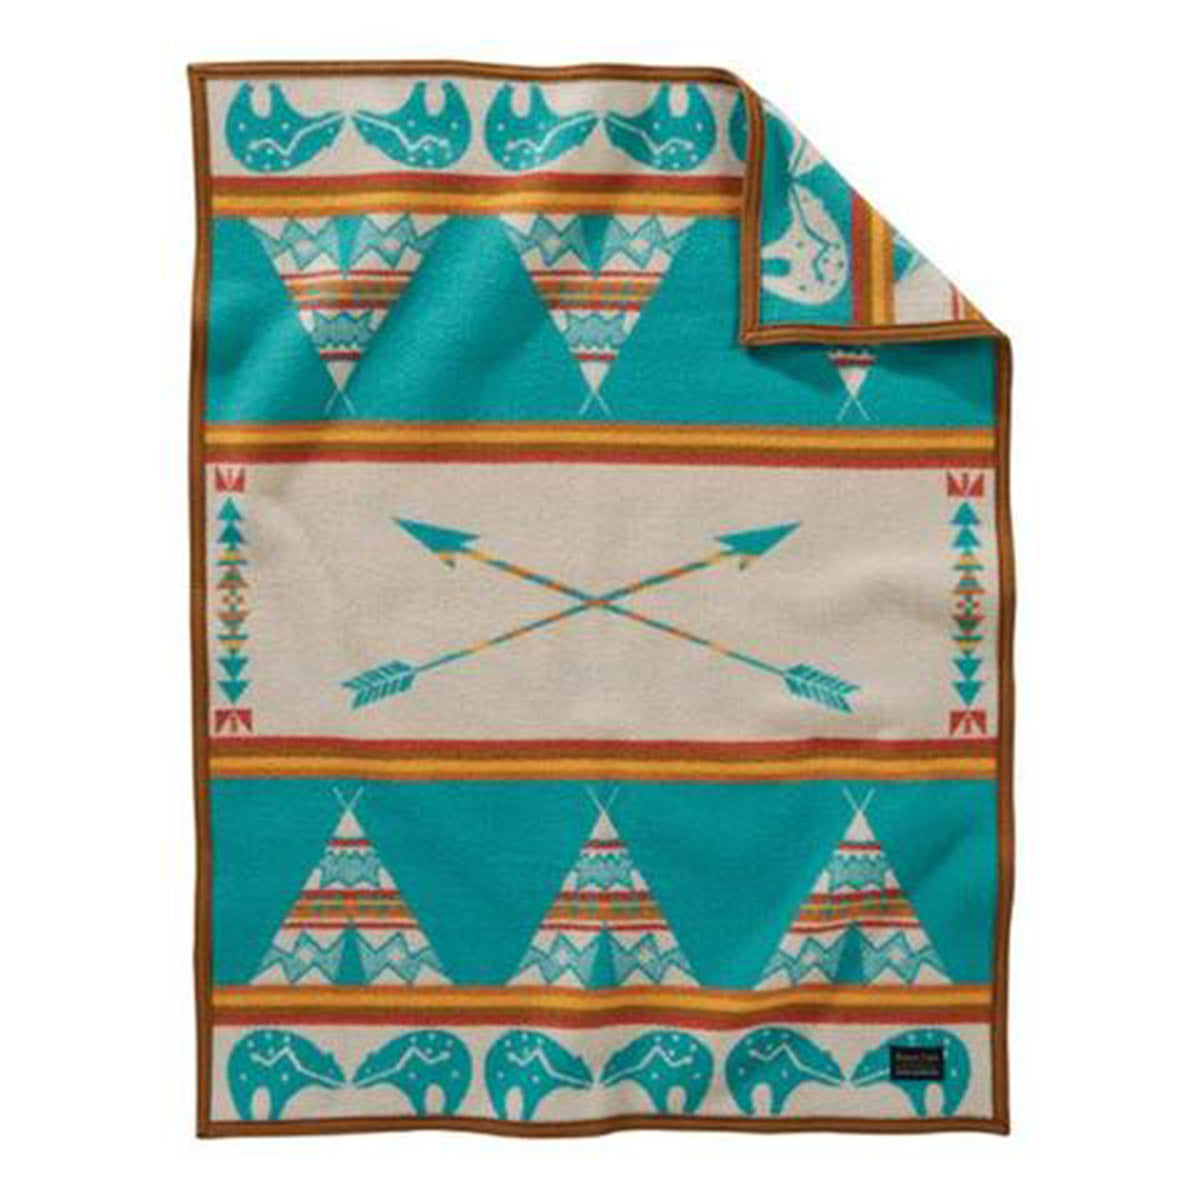 Pendleton blankets are heirloom-quality wool blankets made in the USA using wool that sourced from ranches around the country. This soft wool baby blanket is designed to evoke a peaceful night of telling tales. Above it all shines Bear, the great guardian of the night skies, and a pair of crossed arrows, symbolizing peace and brotherhood.